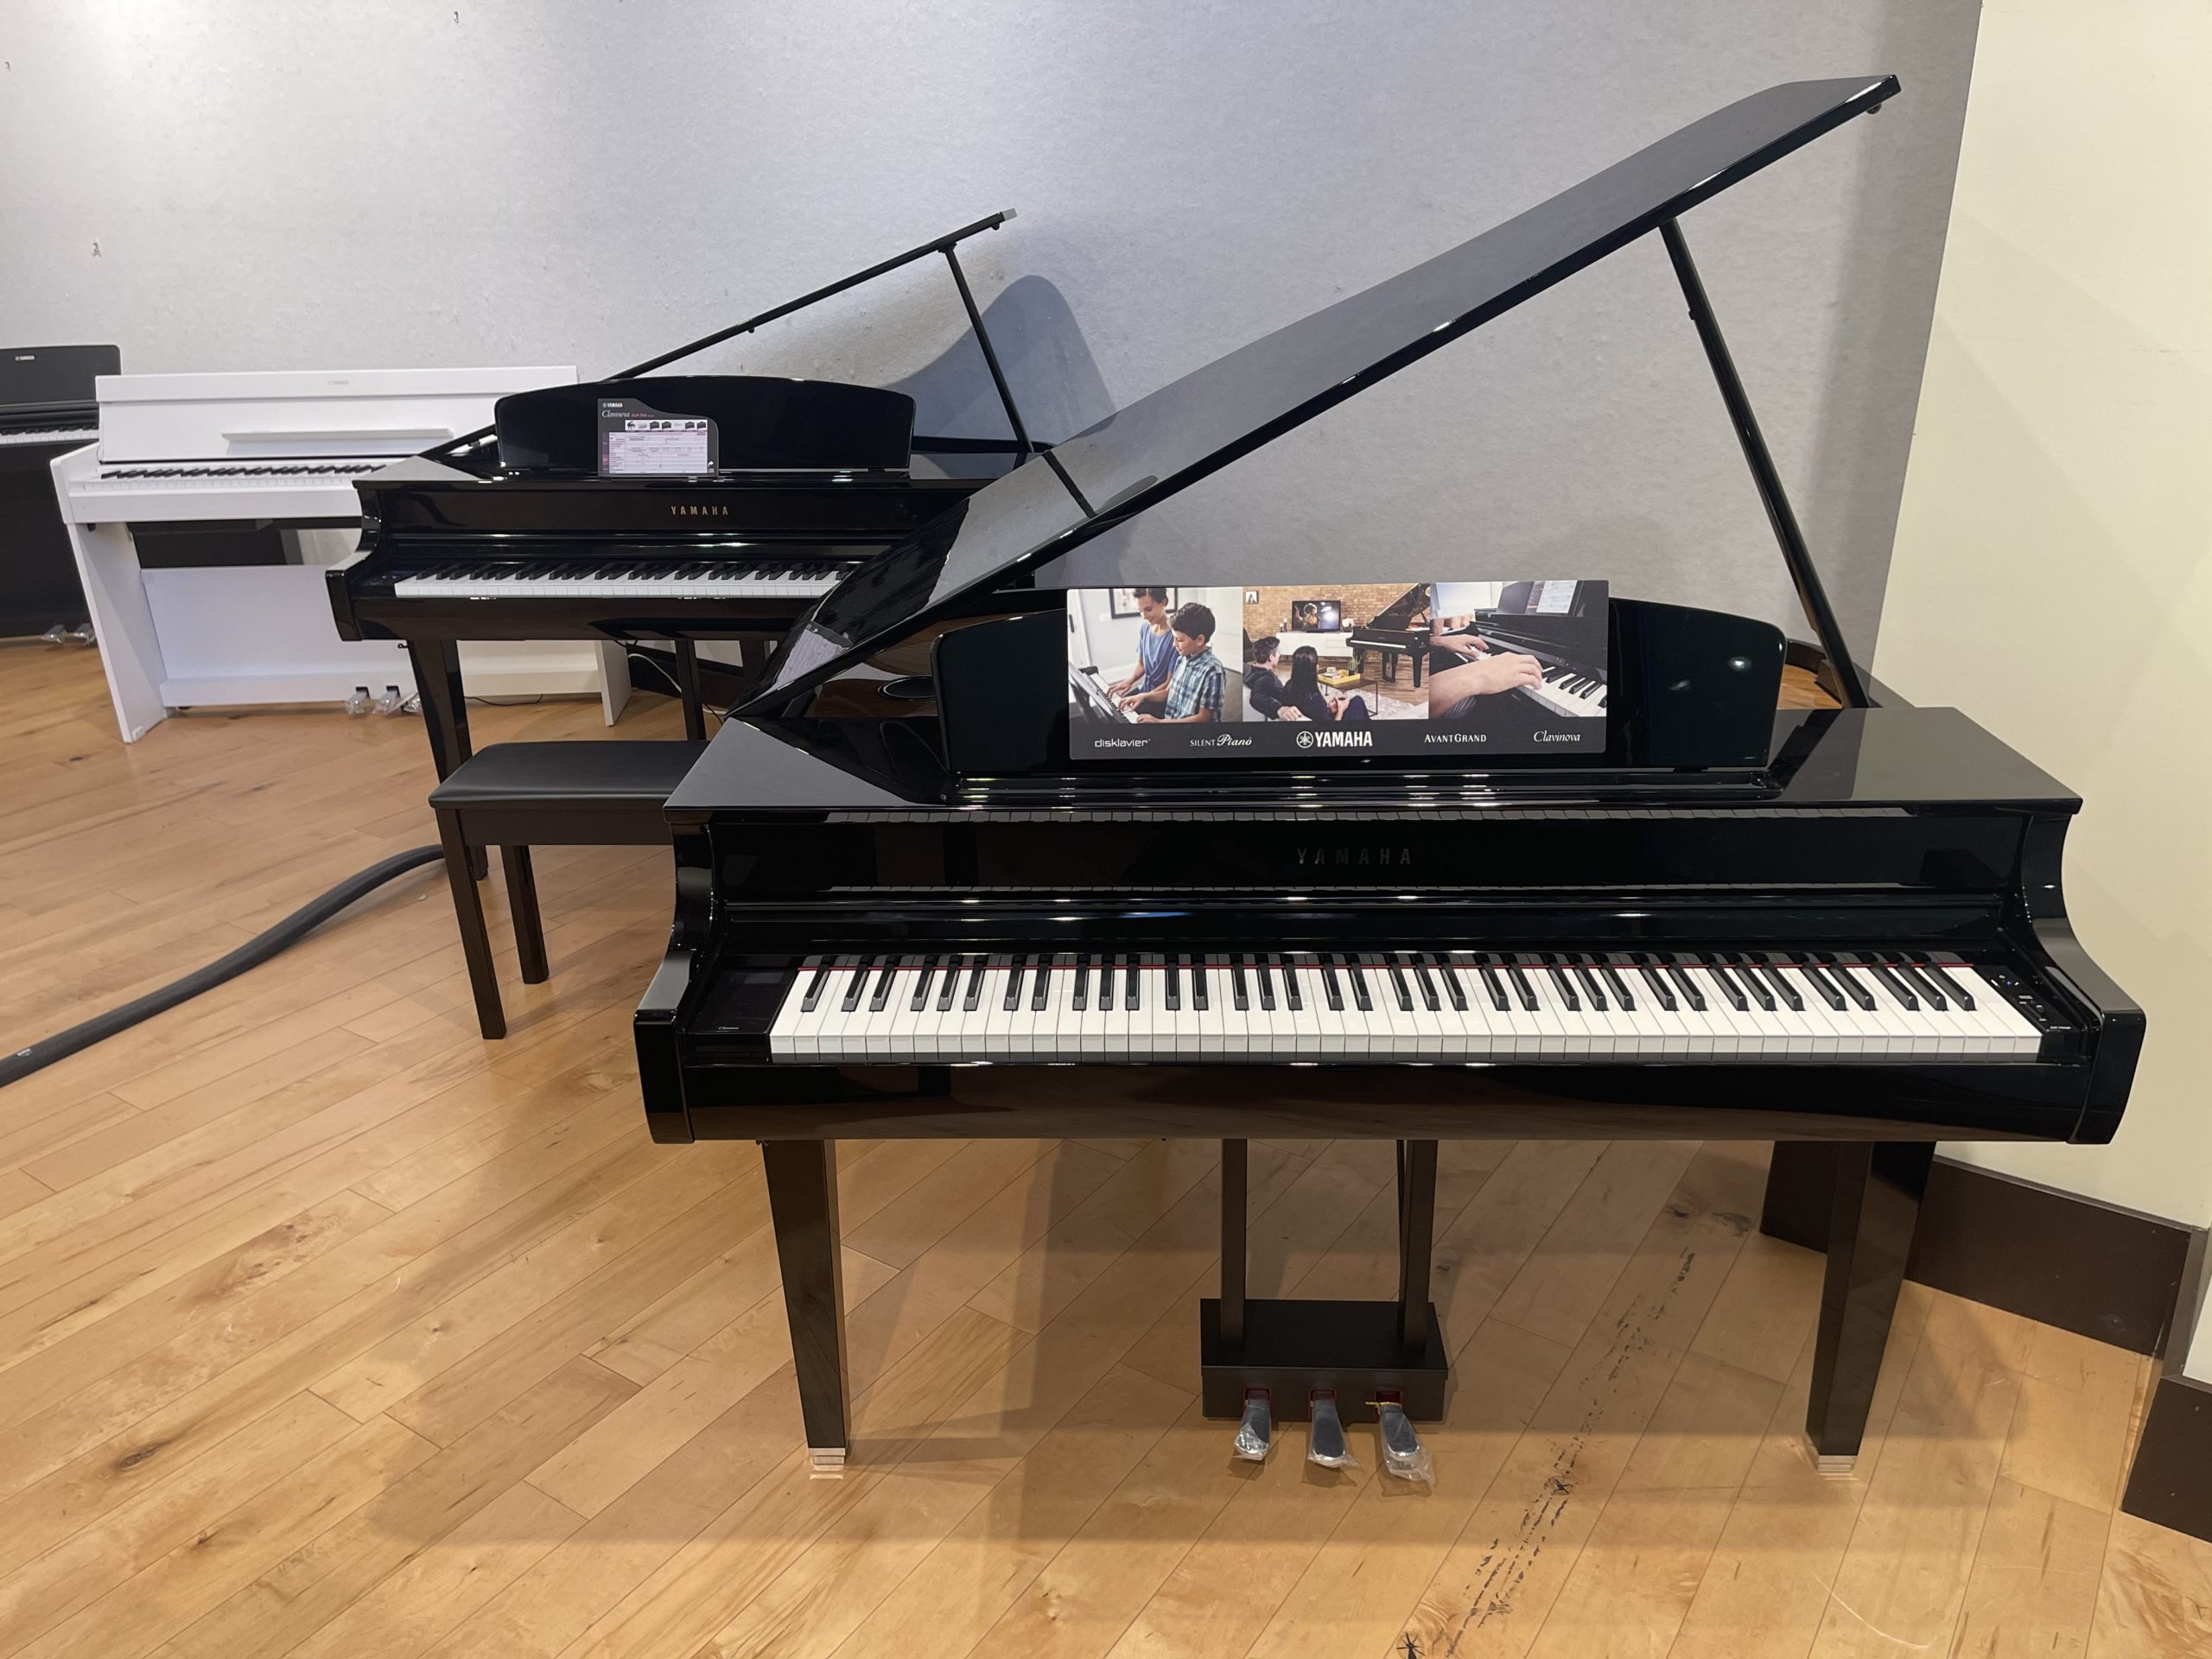 Solich Piano of Columbus | 4194 Easton Gateway Dr Columbus, OH 43219 | Exclusive Yamaha Piano Dealer For Ohio